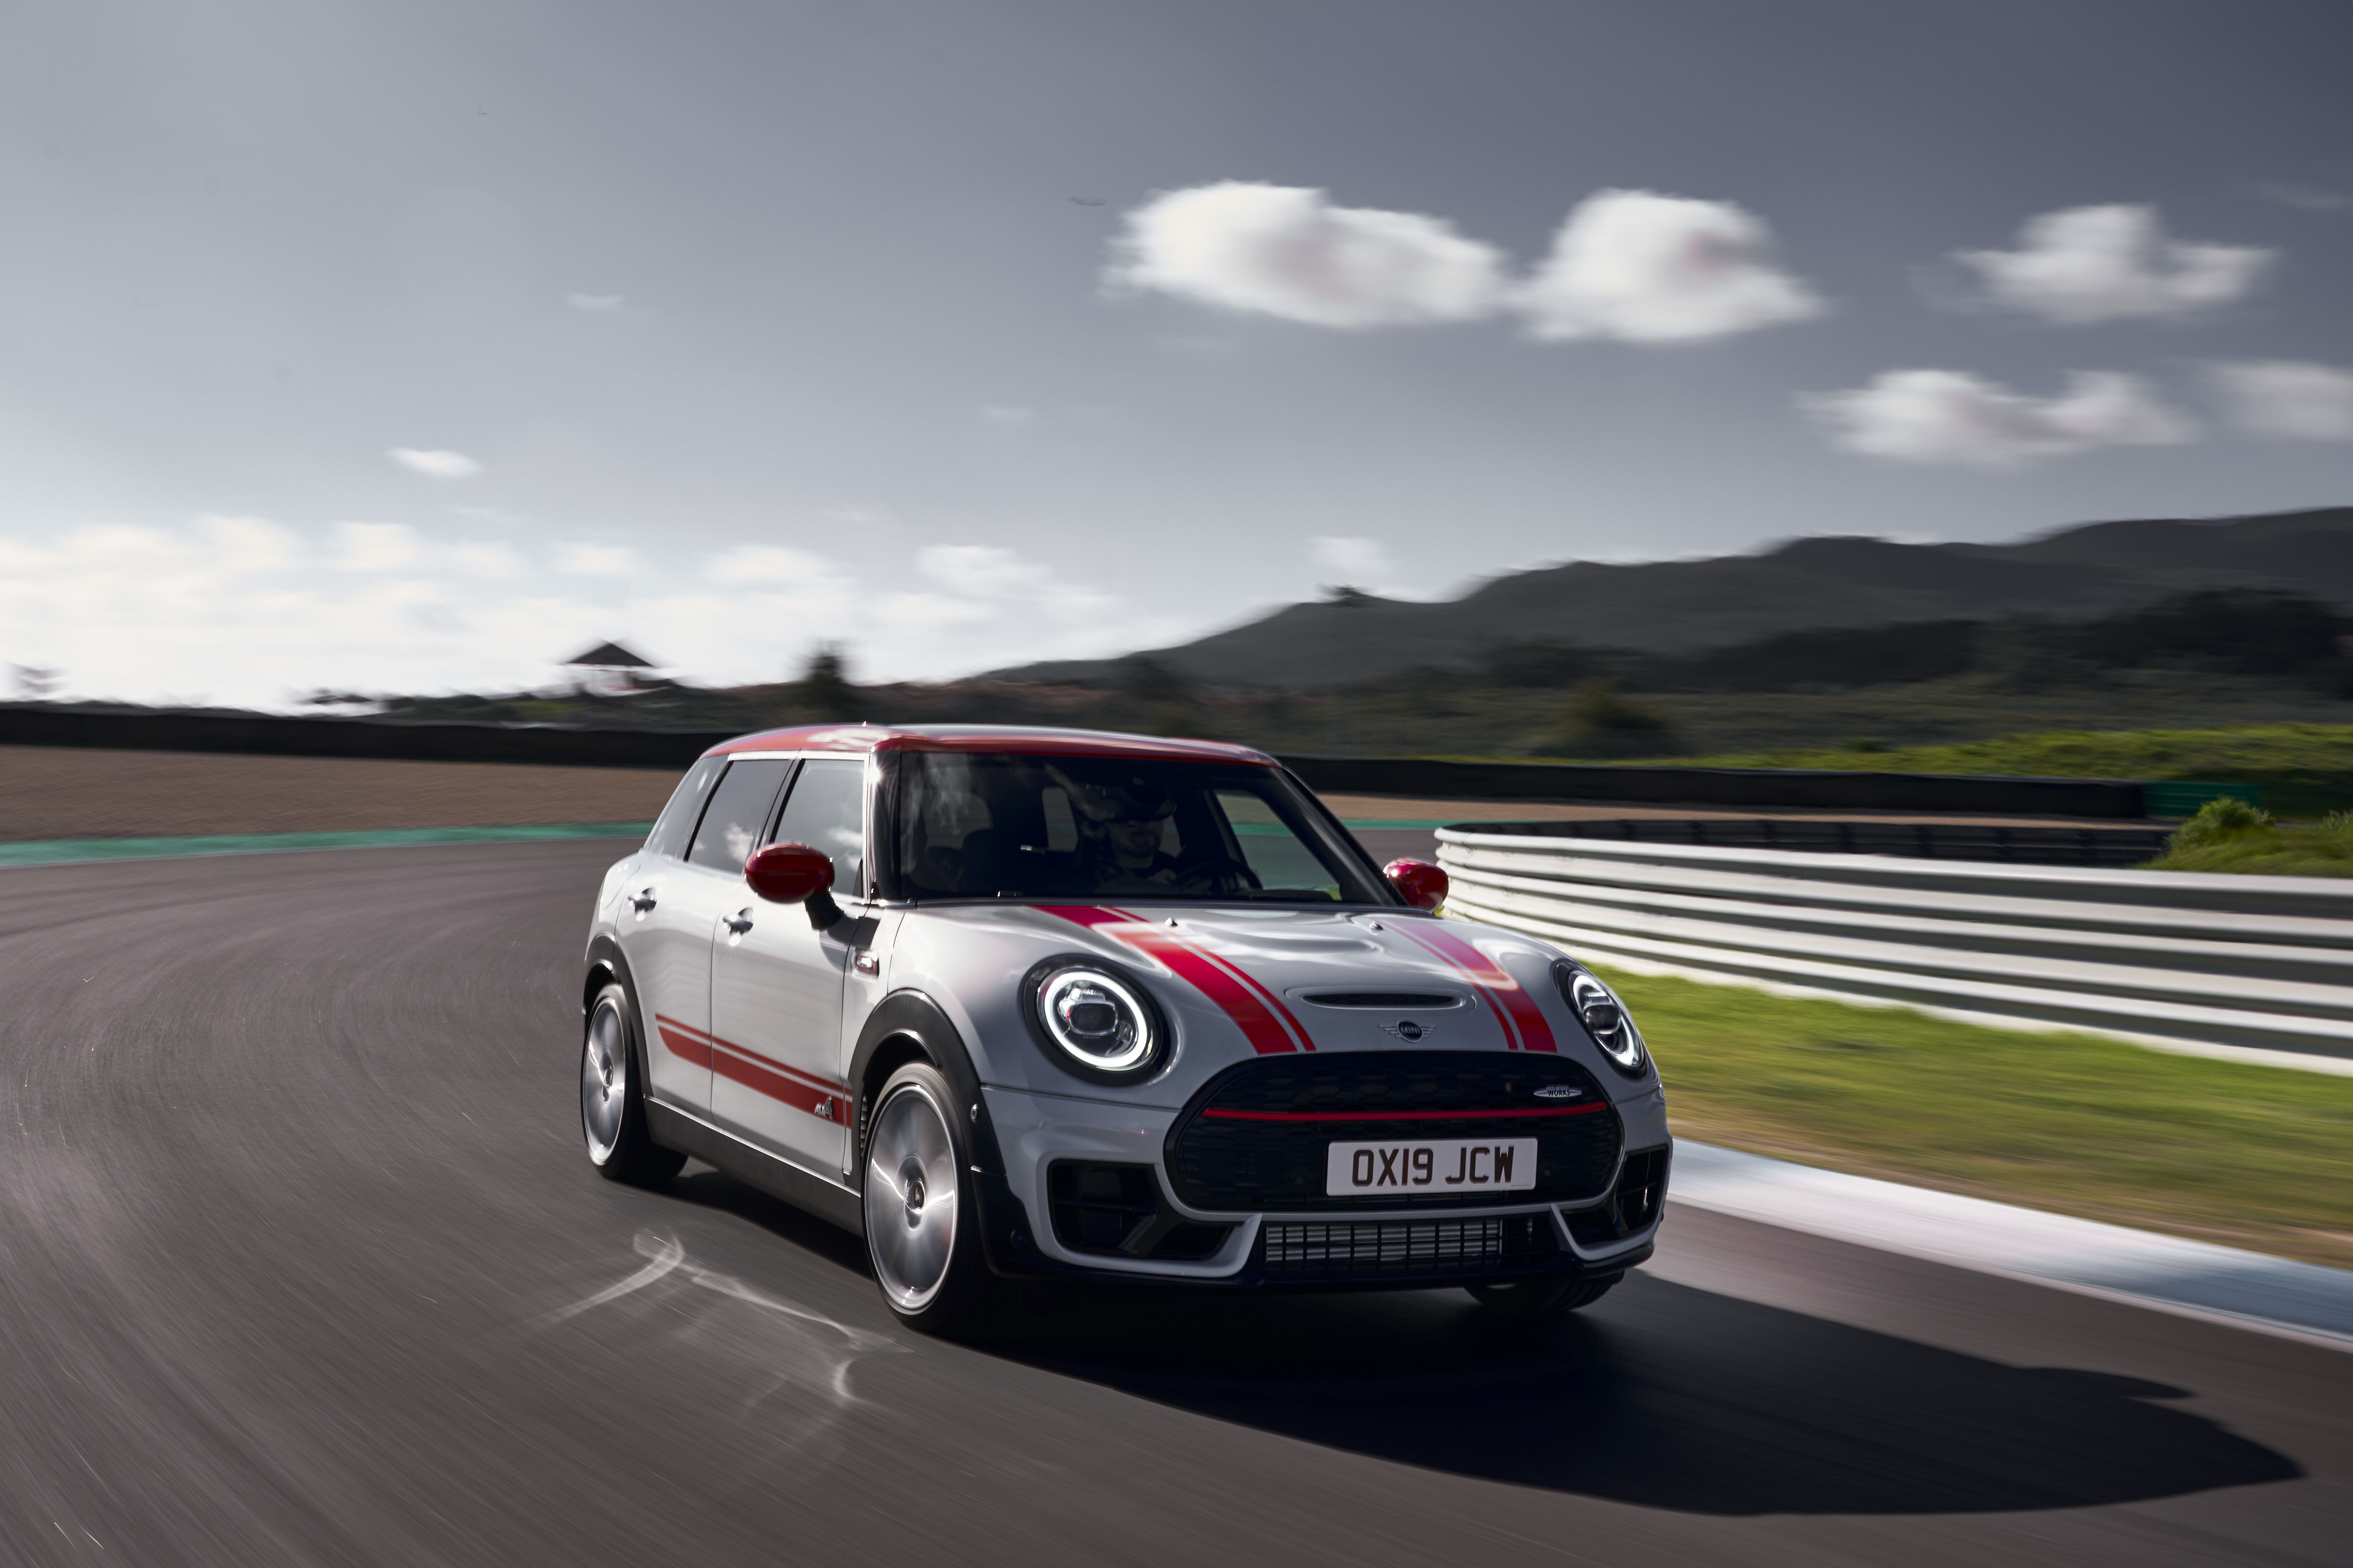 2022 Mini John Cooper Works Review: A grin-inducing go kart on steroids